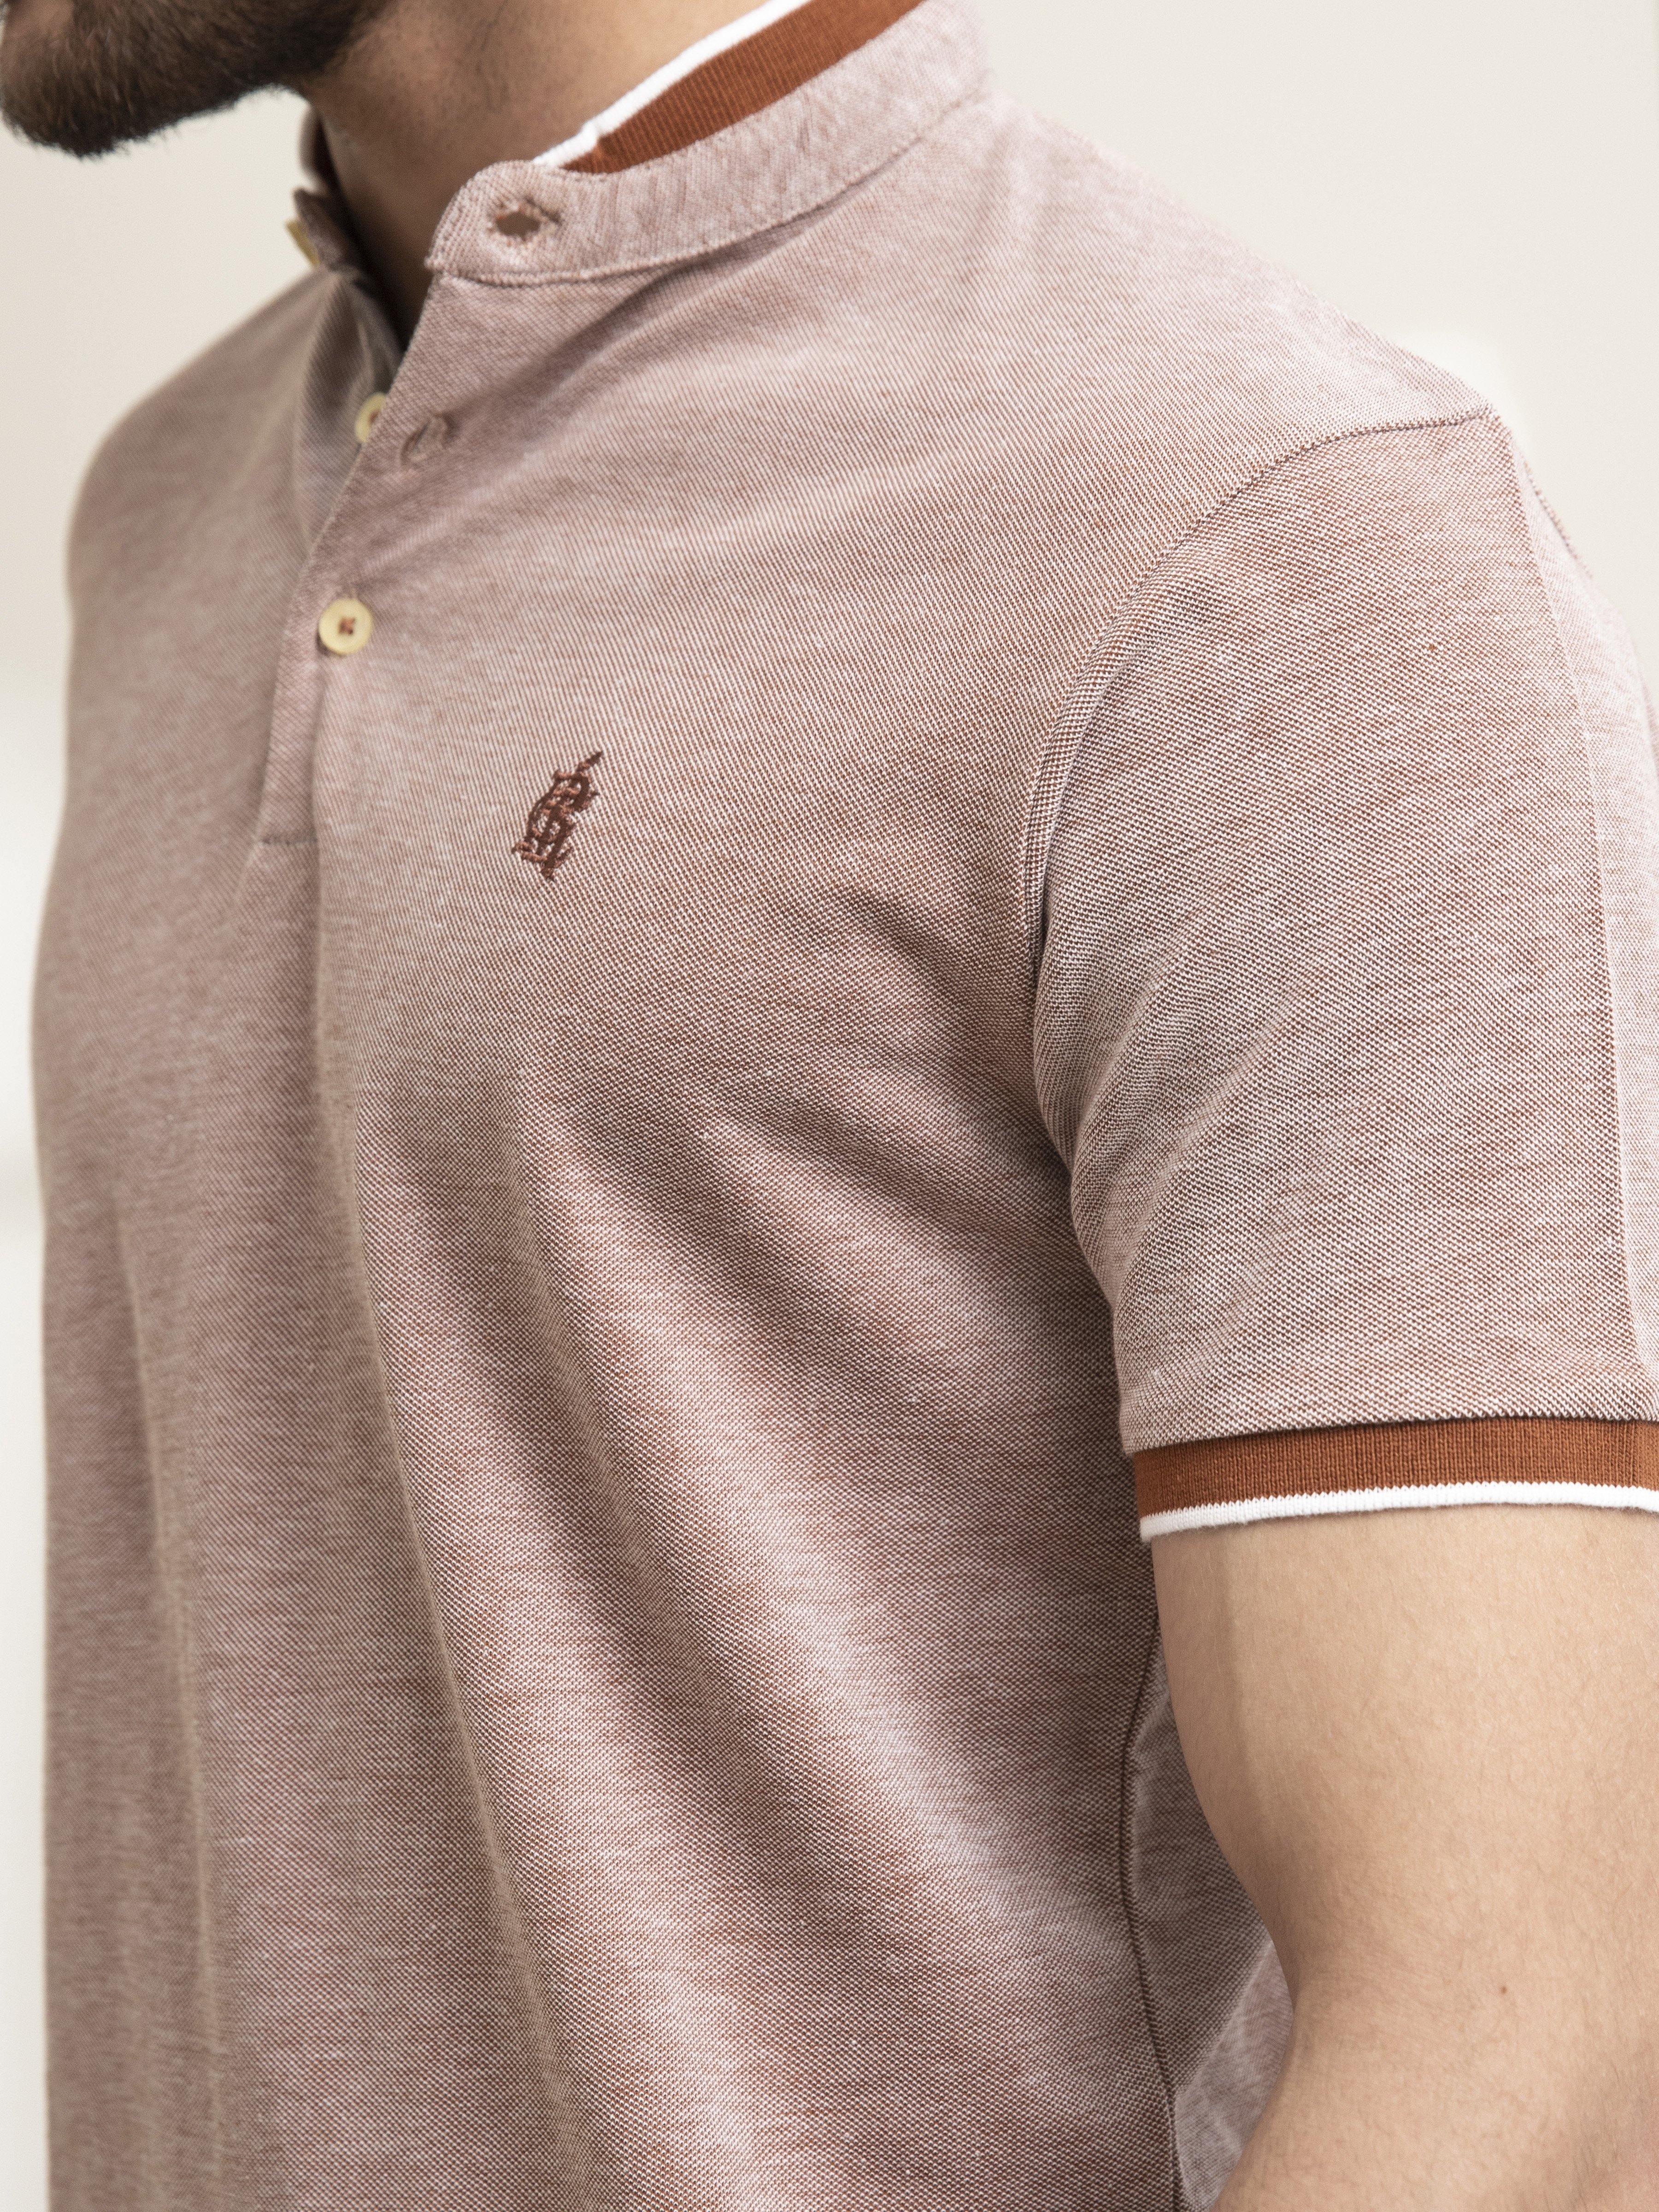 T SHIRT BAN COLLAR BIRD EYE WITH EMBROIDERY RUST at Charcoal Clothing